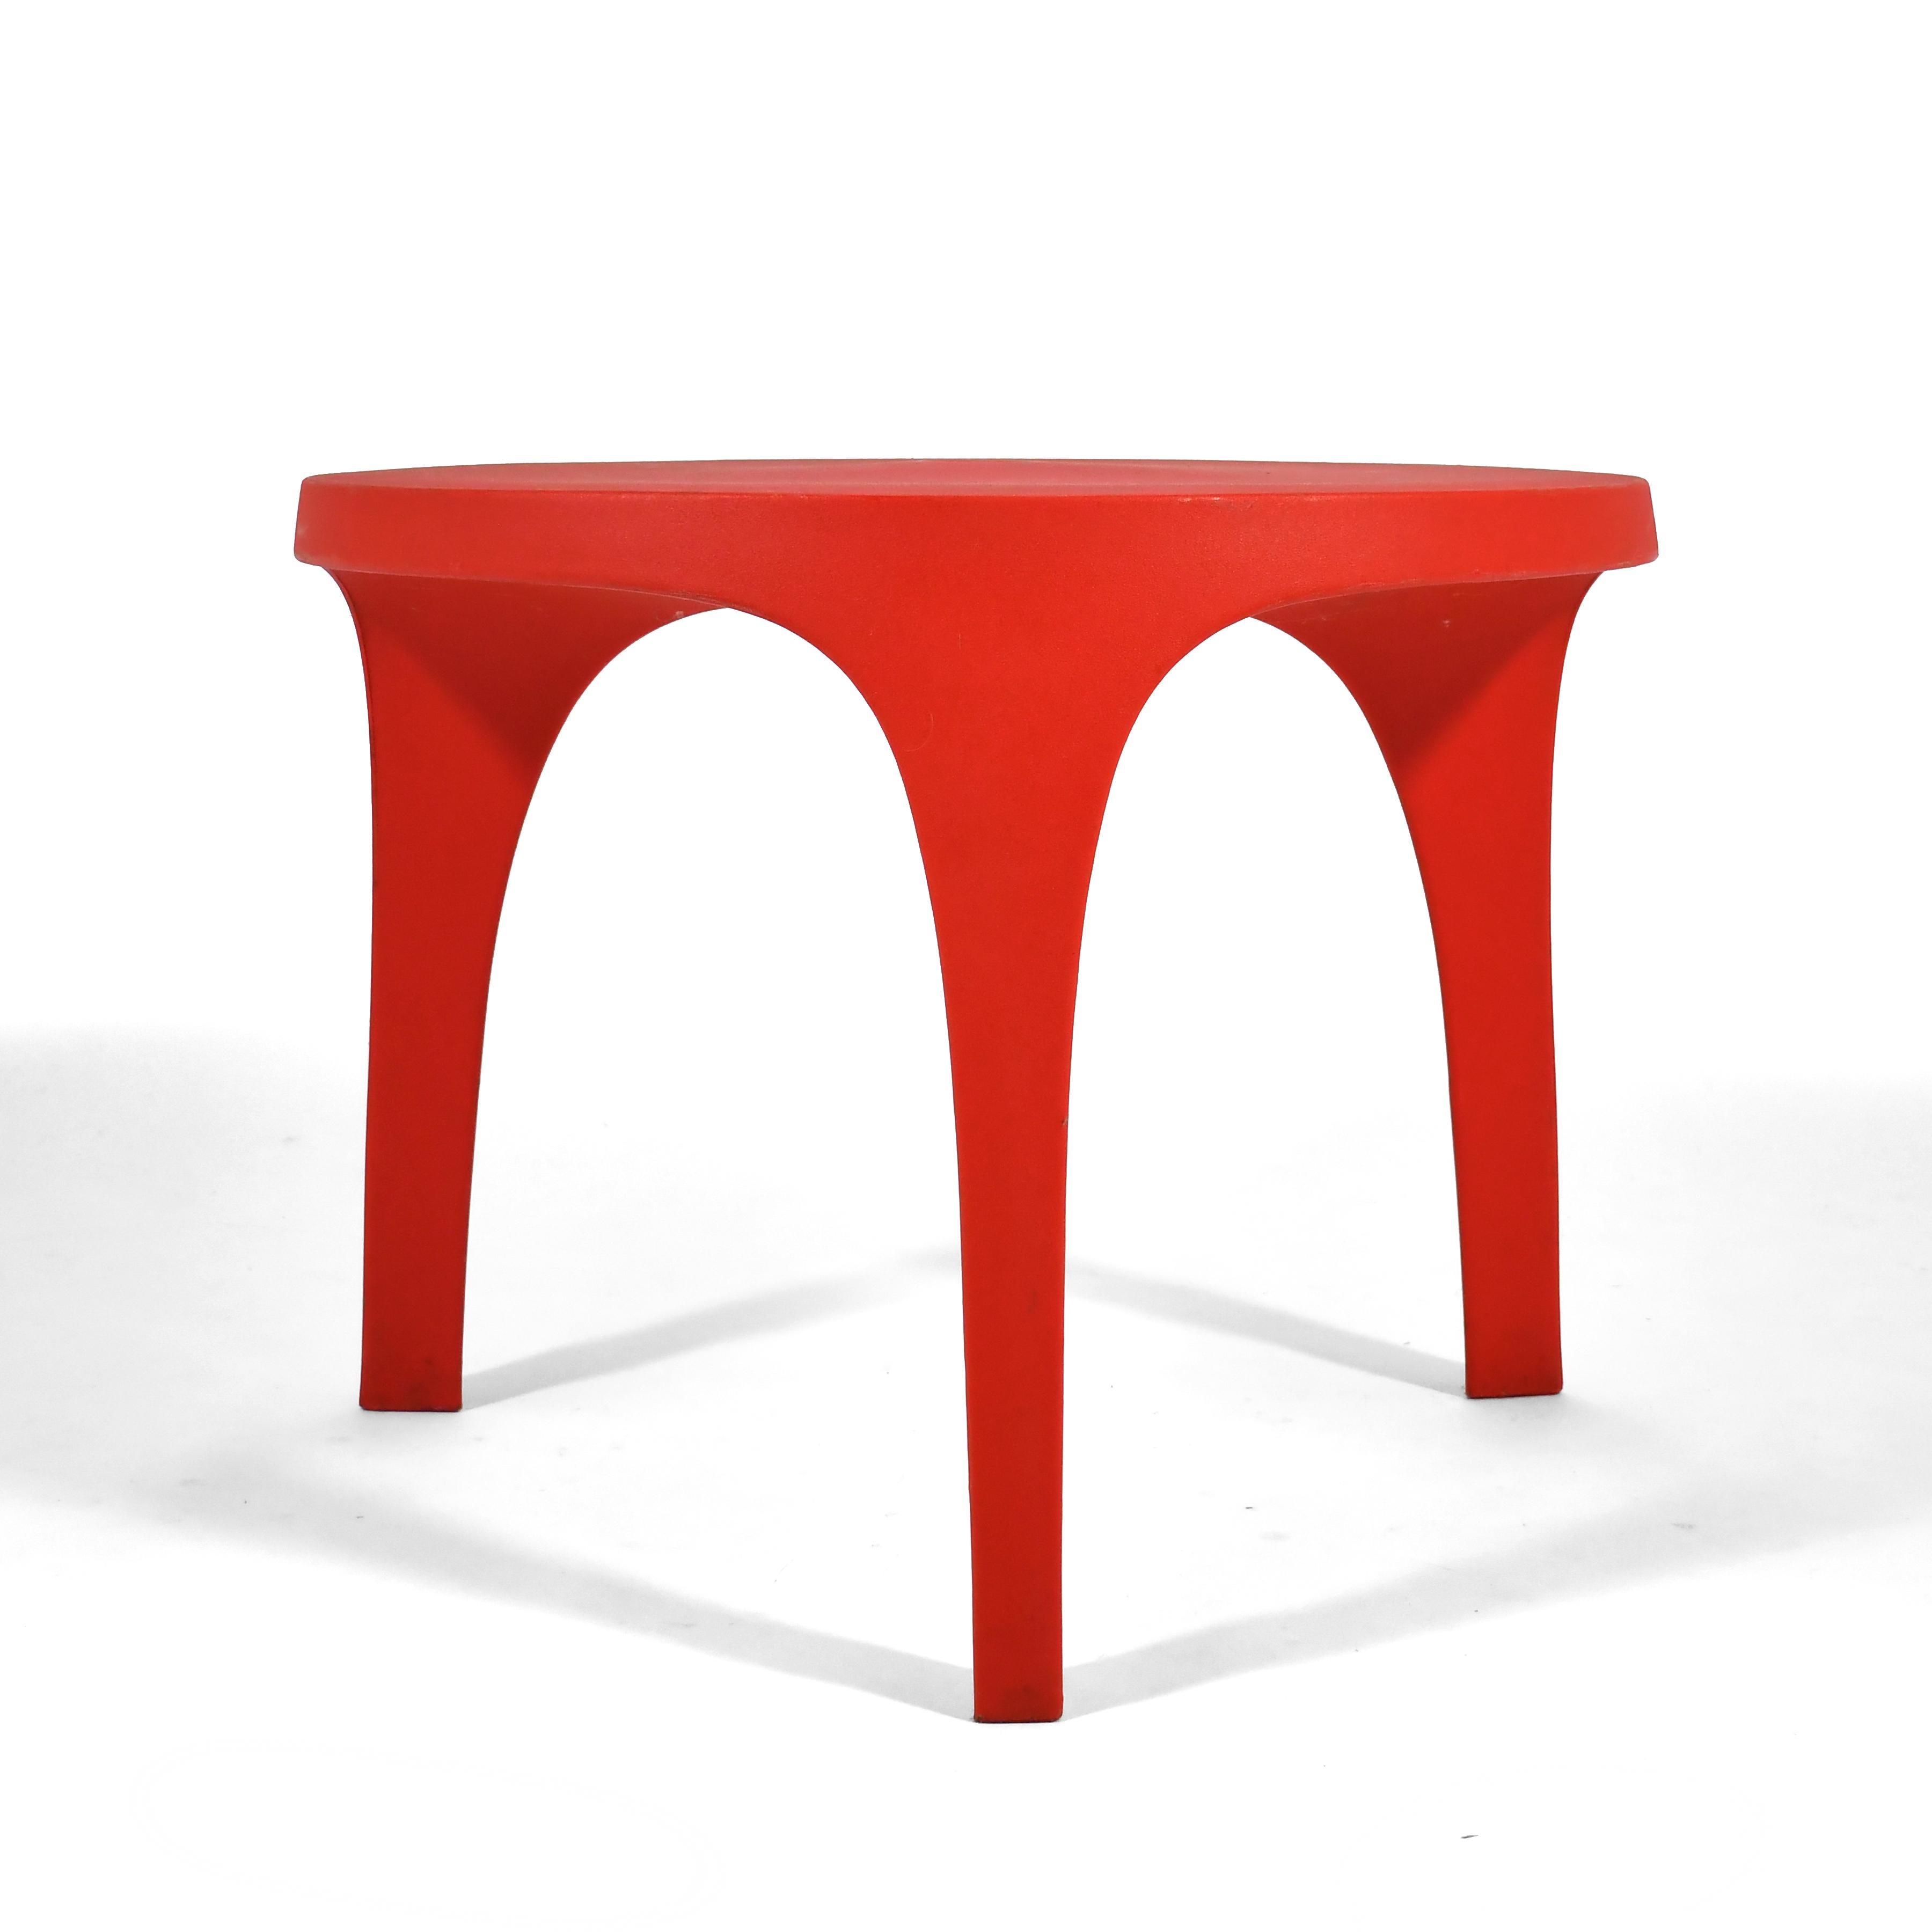 Ron Arad Victoria Albert Table by Moroso In Good Condition For Sale In Highland, IN